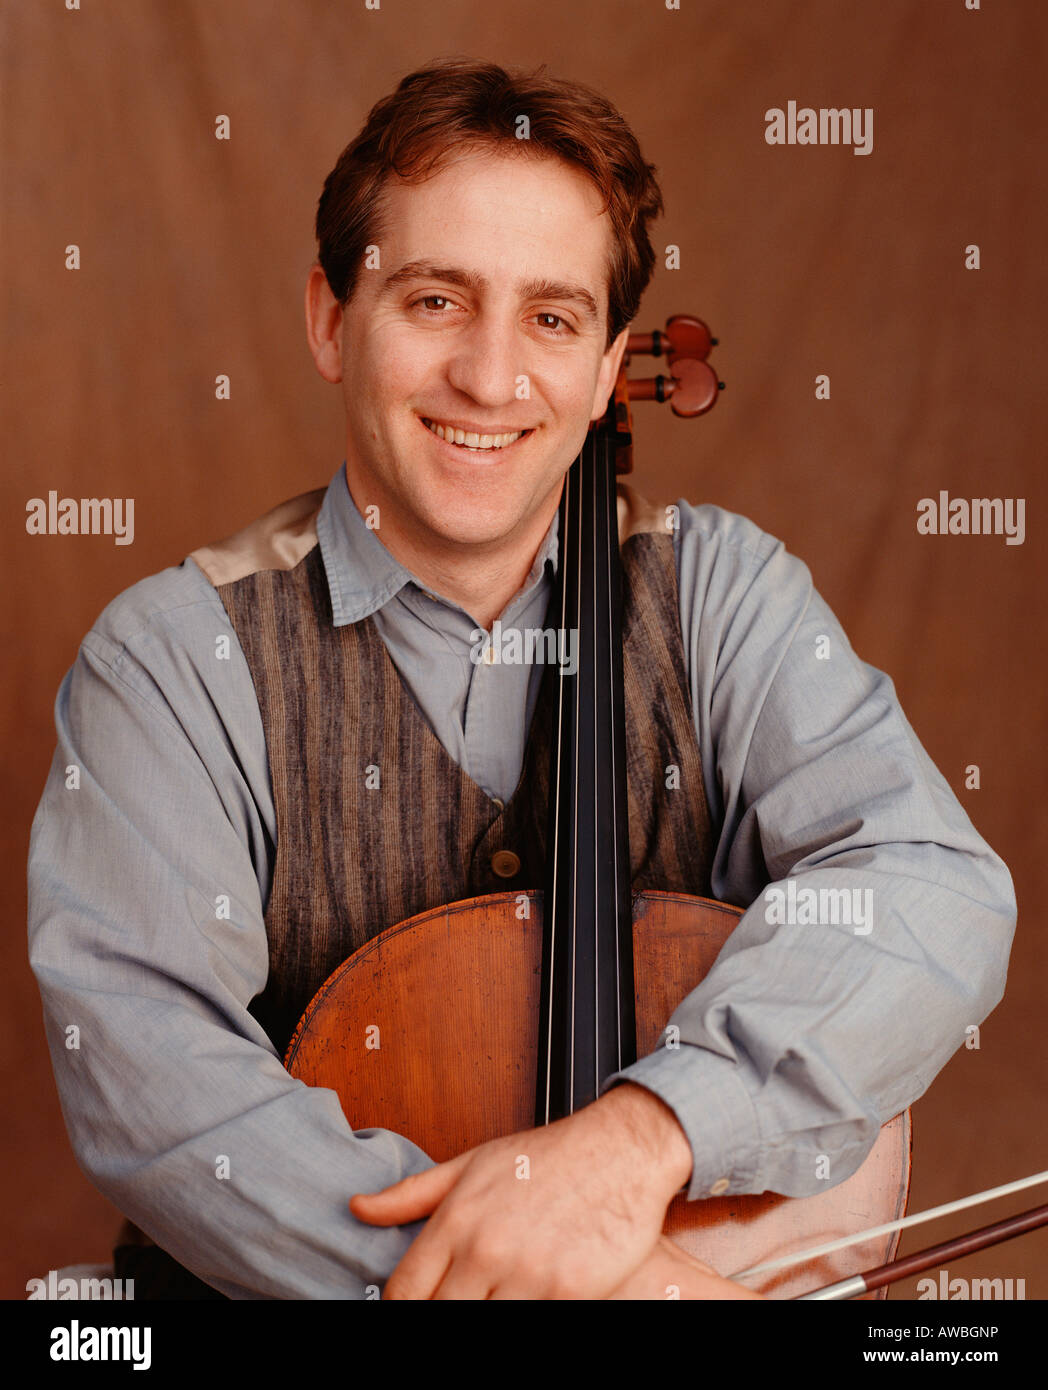 A man in his mid thirties holding a cello. Stock Photo